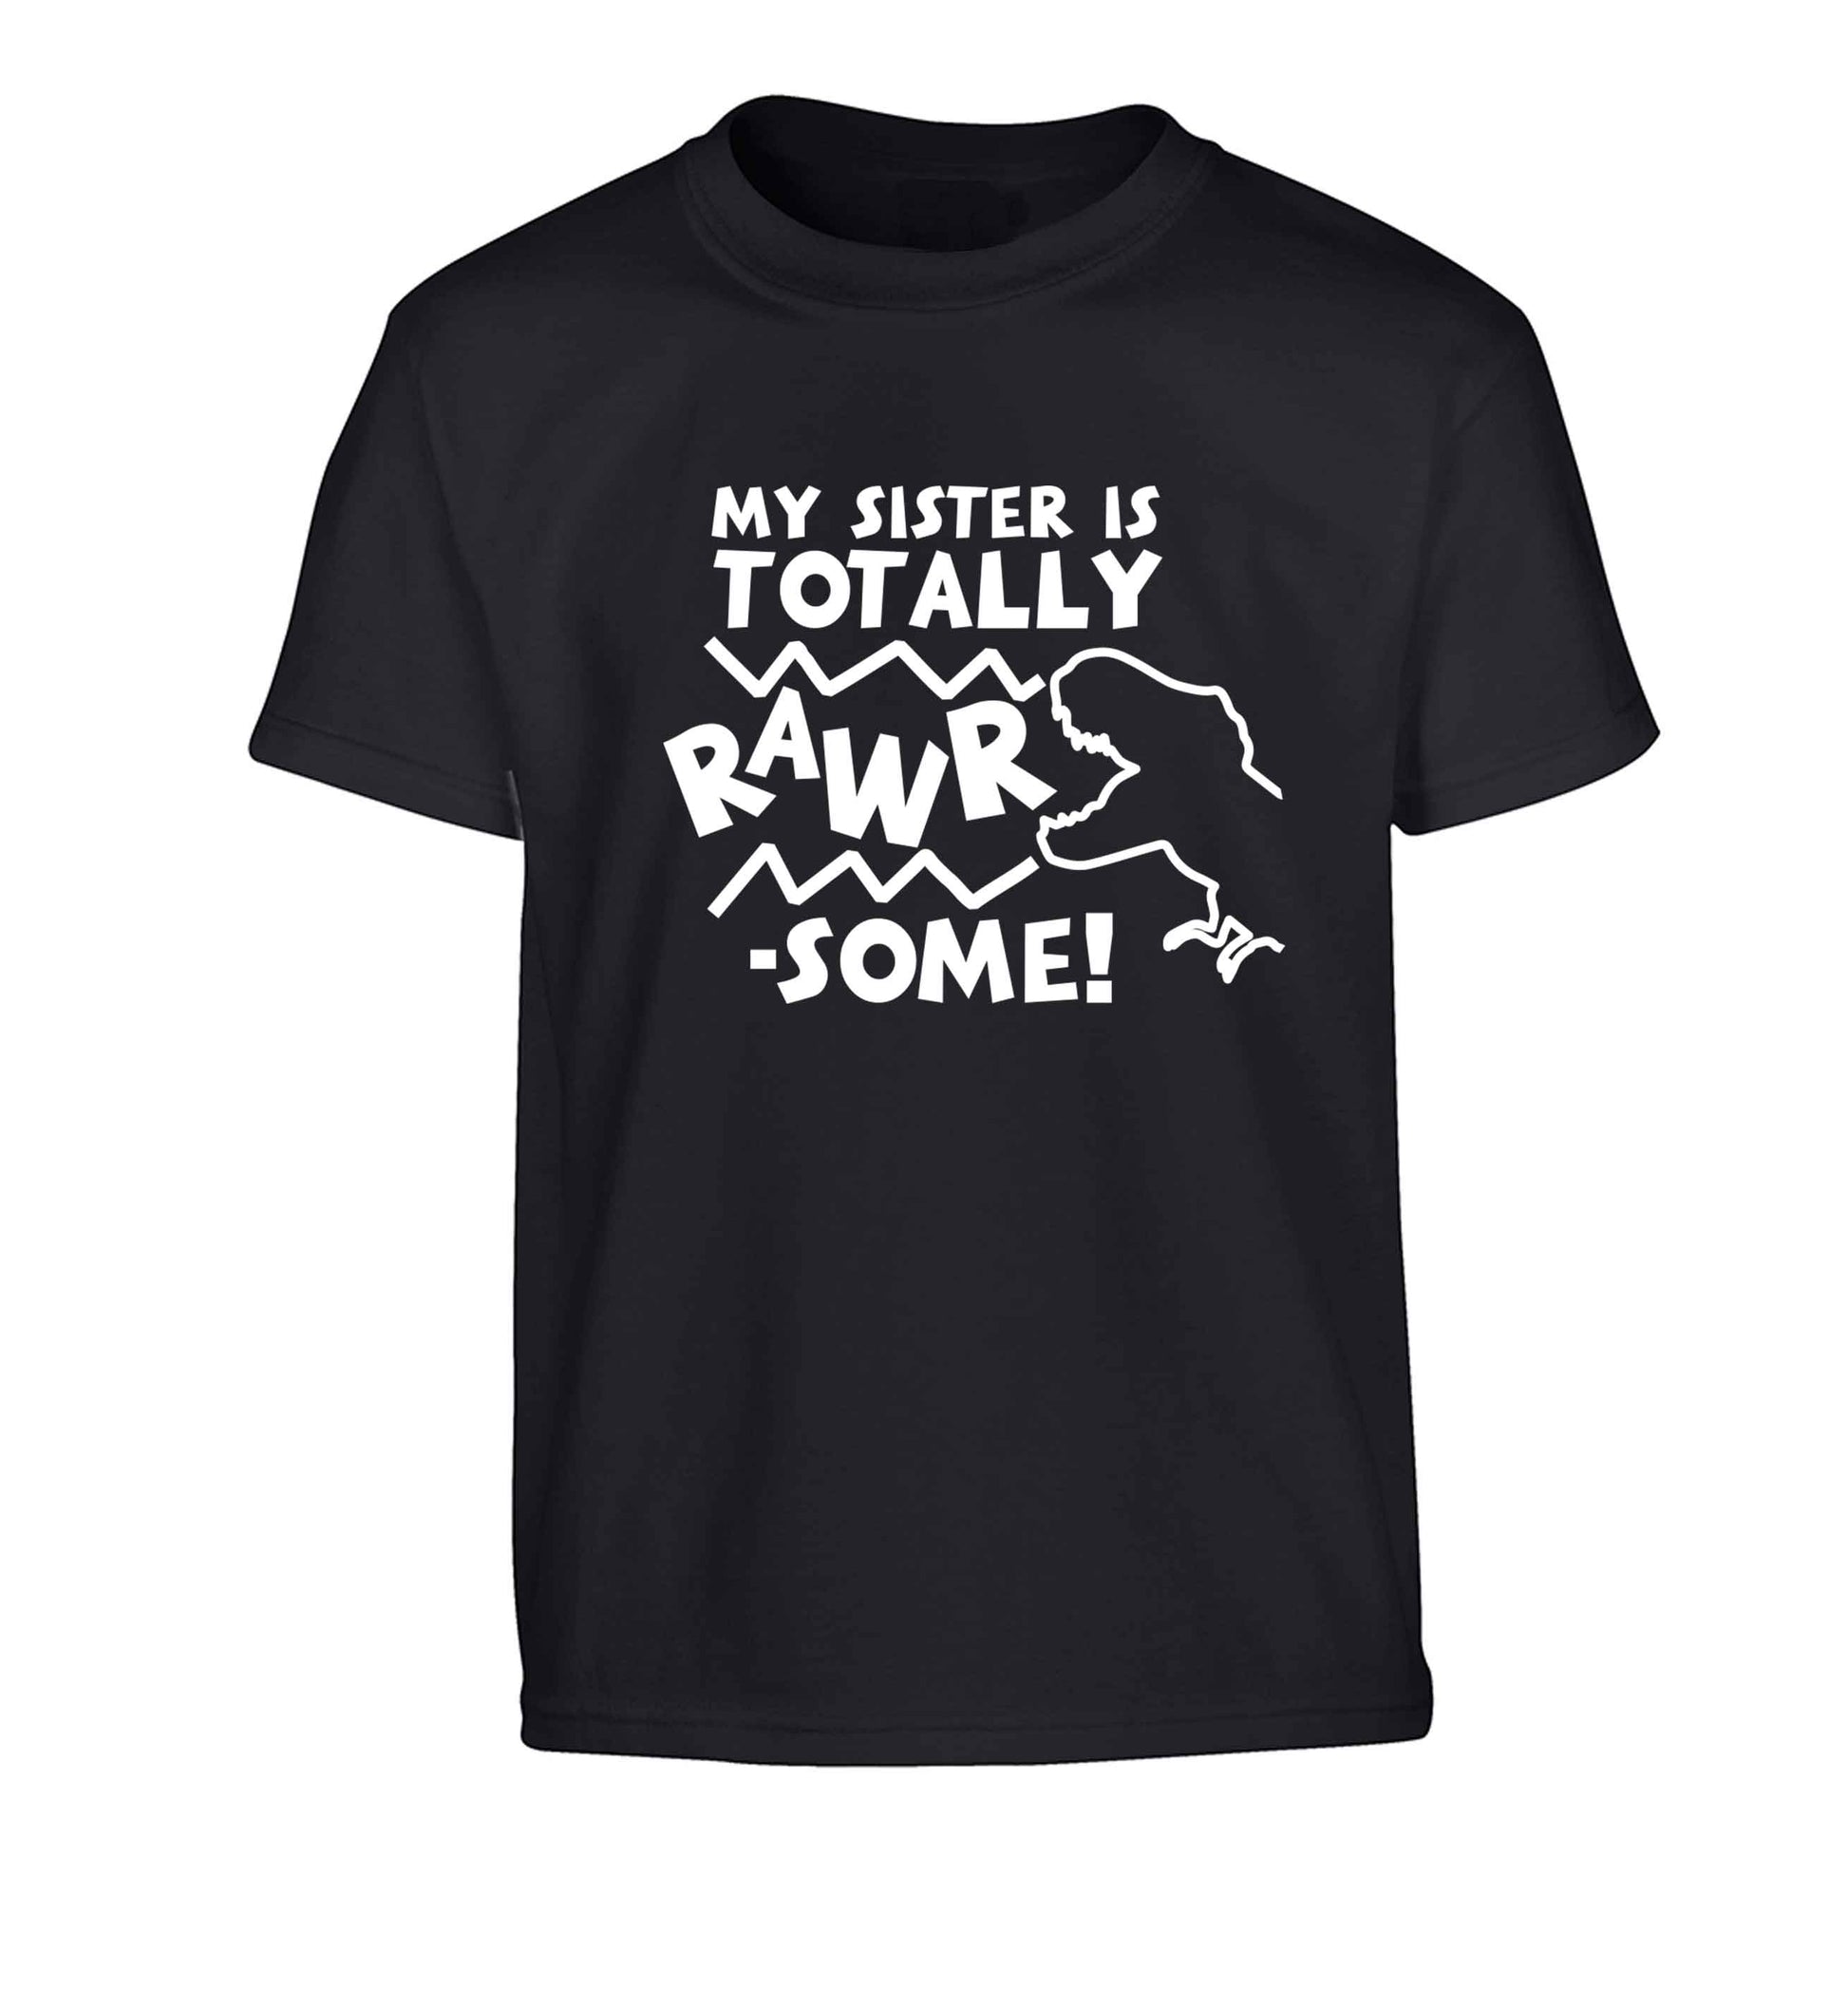 My sister is totally rawrsome Children's black Tshirt 12-13 Years